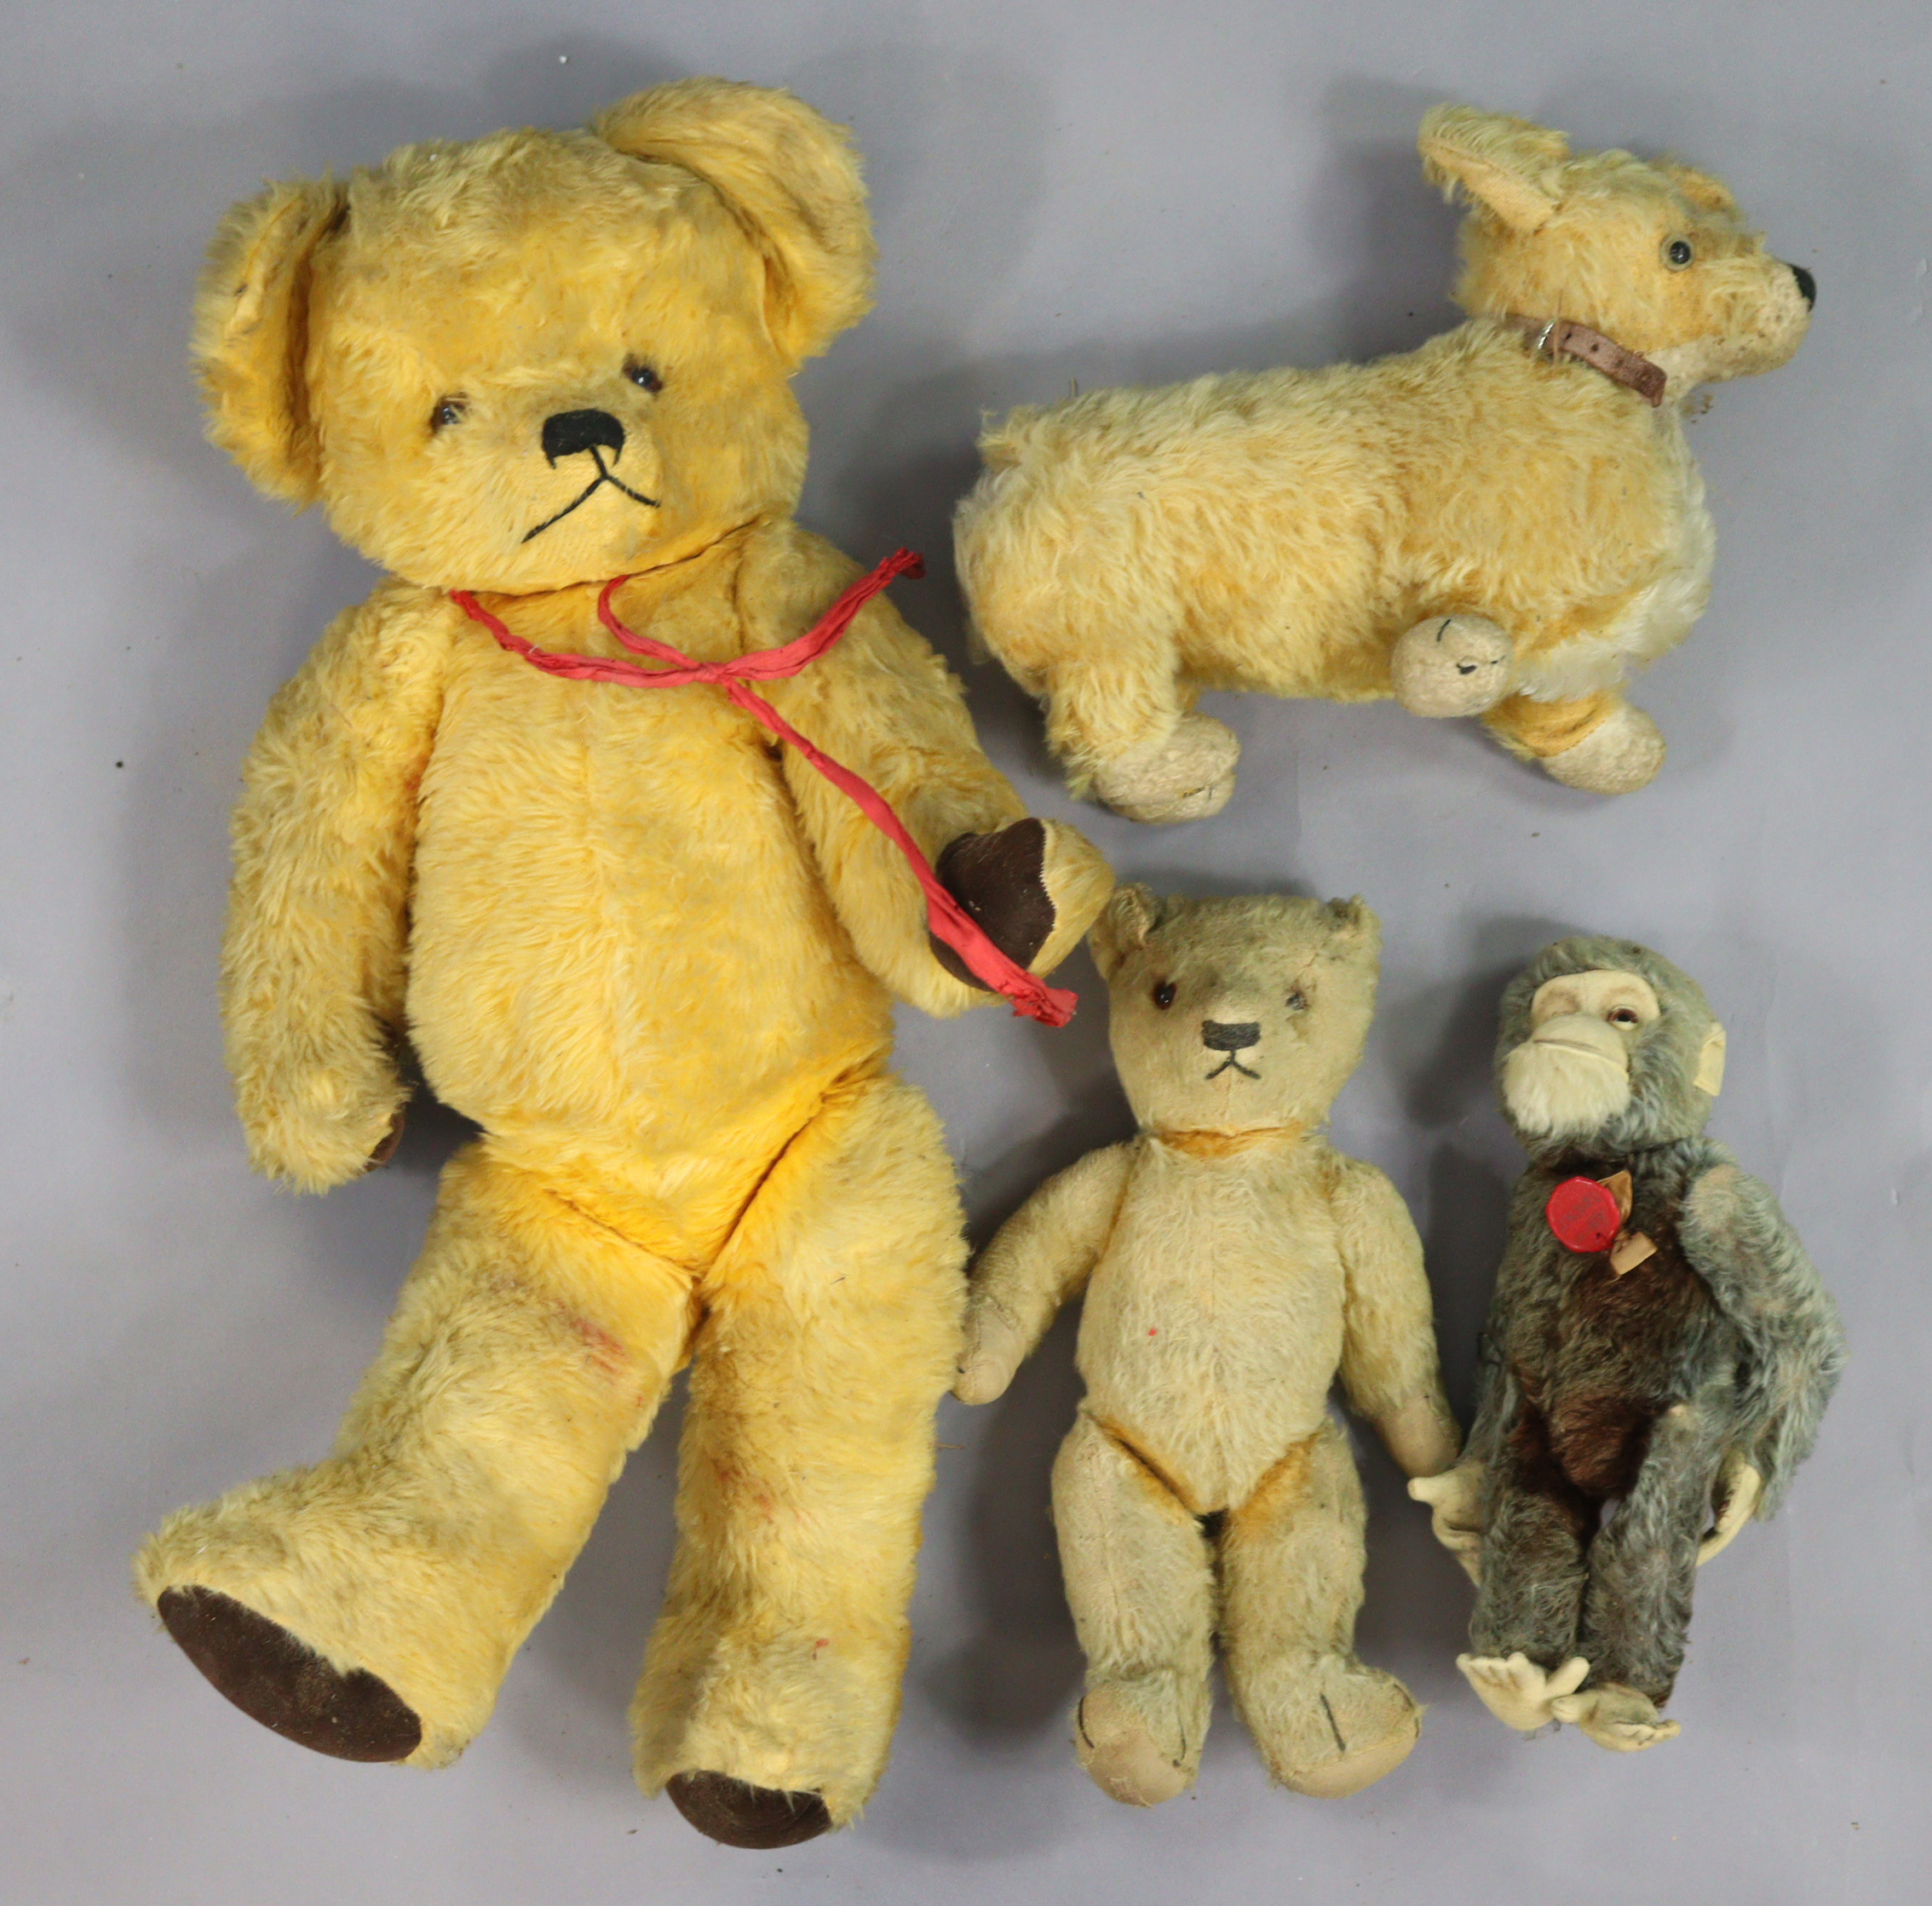 A Schuo “Tricky” monkey automaton toy, a Merrythought dog soft toy, and two golden plush teddy